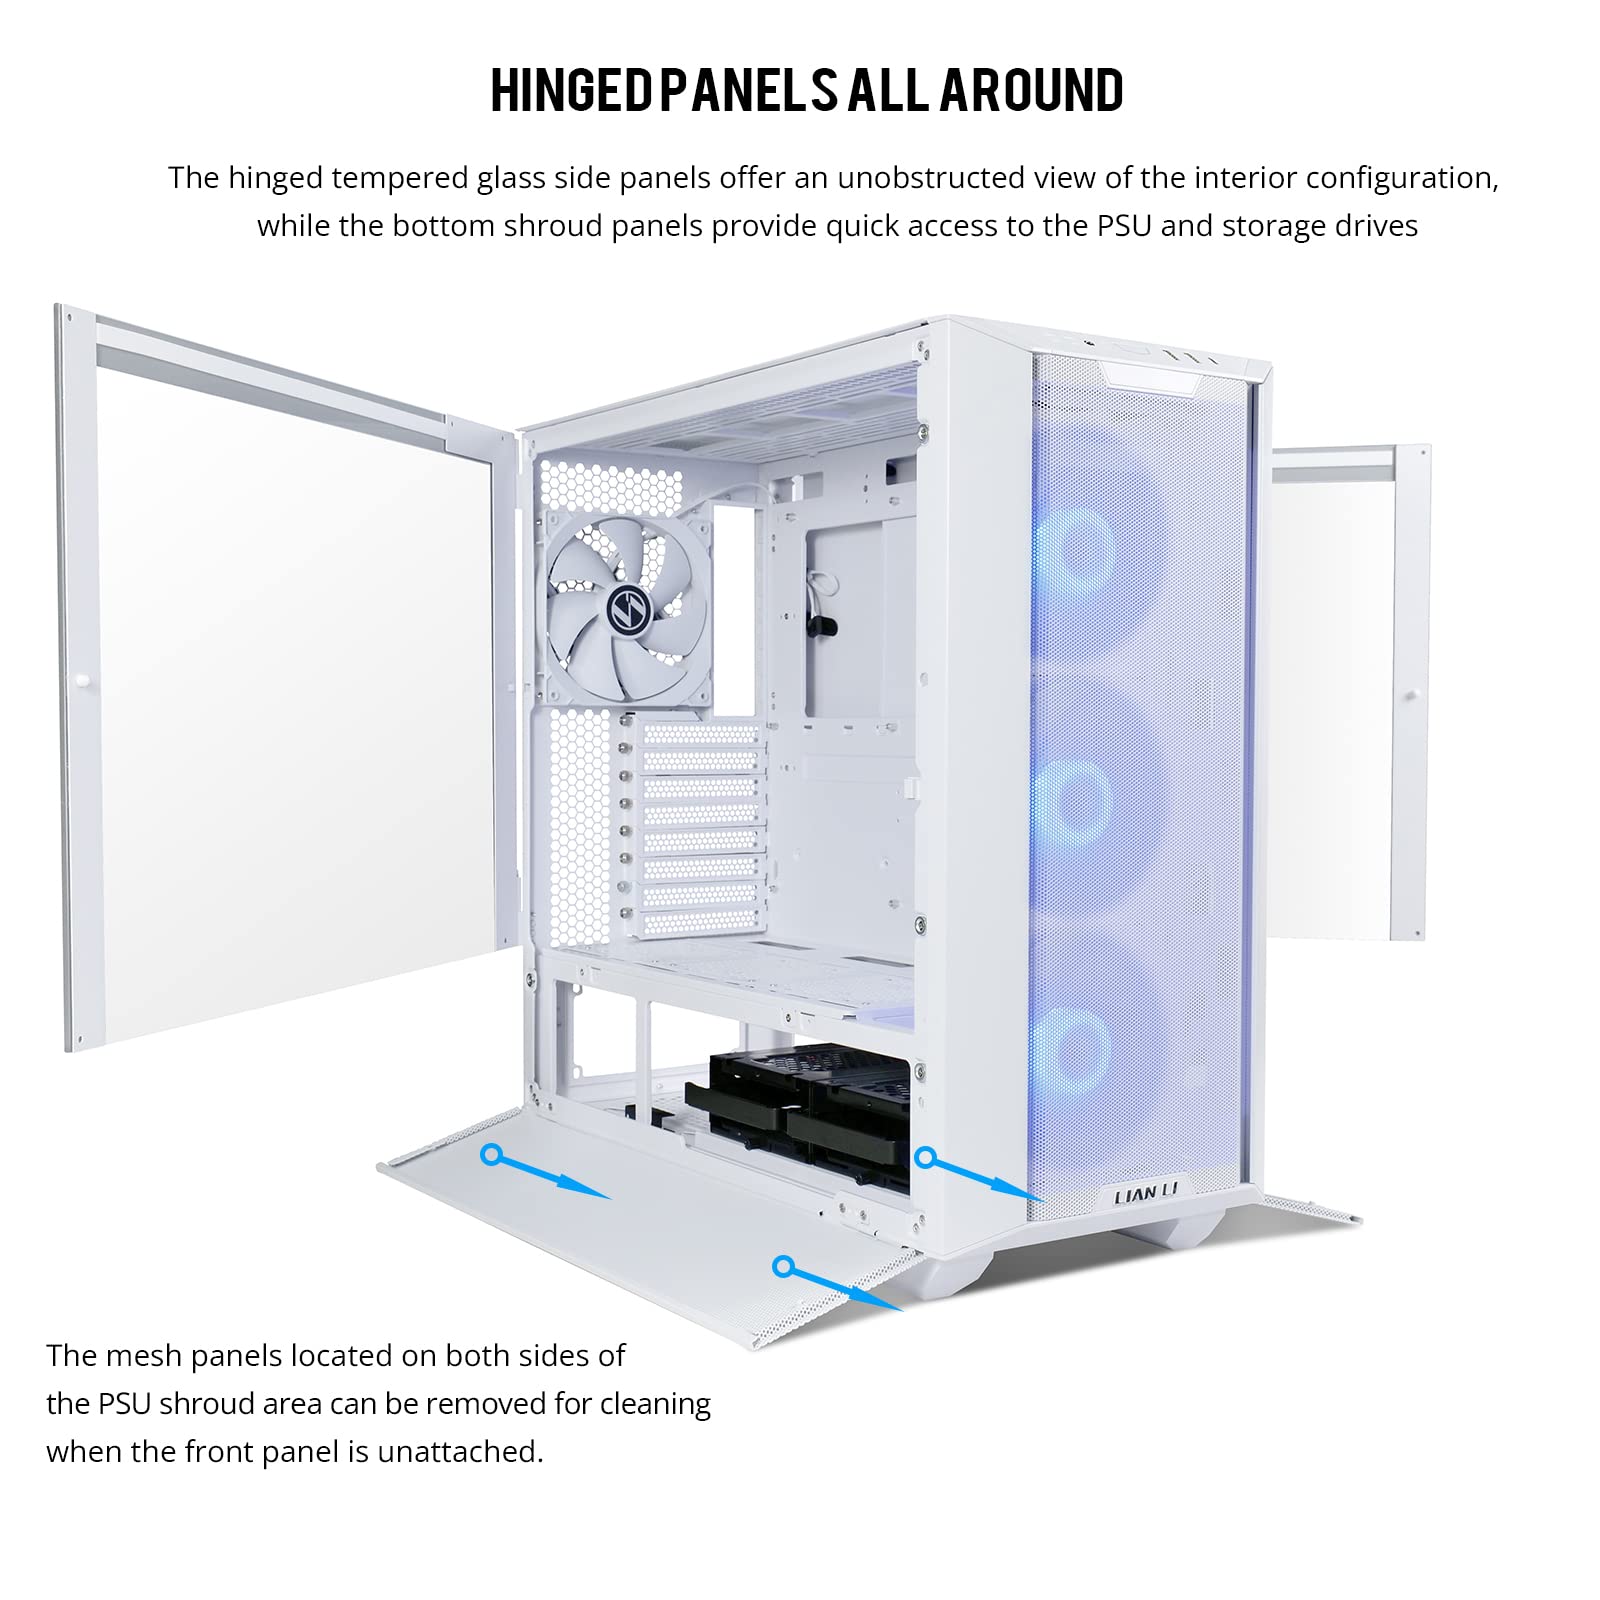 LIAN LI LANCOOL III E-ATX PC Case, Spacious RGB Gaming Computer Case with Hinged Tempered Glass Doors, Fine Mesh Panels, 4x140mm PWM Fans Pre-Installed High Airflow Chassis (White)